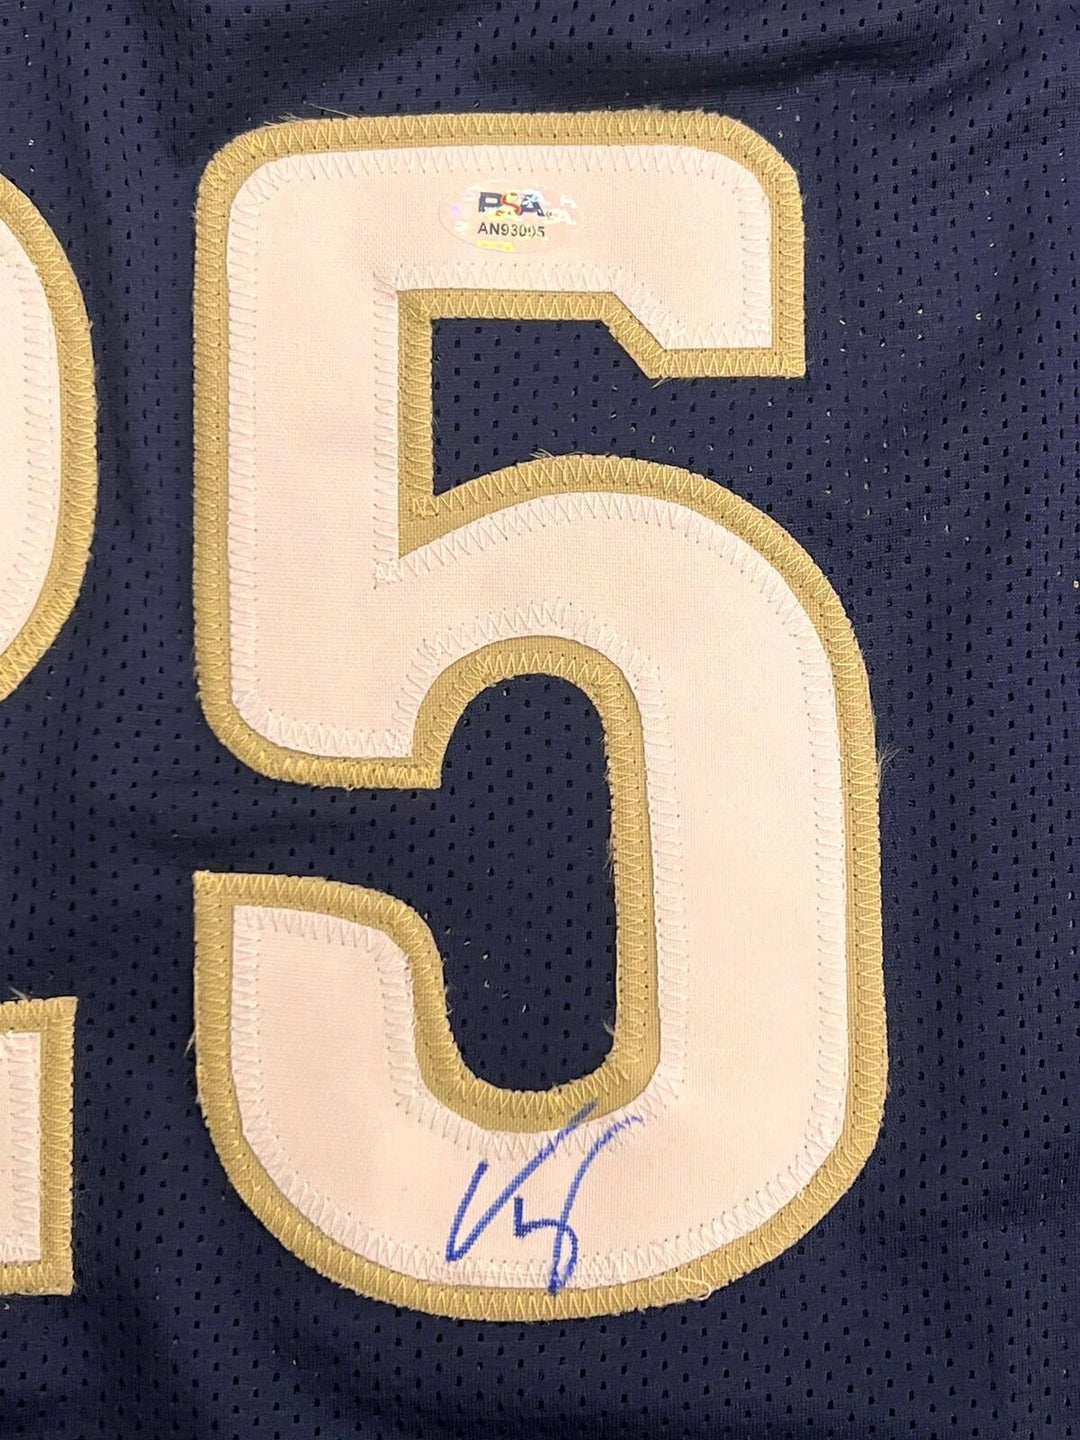 Trey Murphy III Signed Jersey PSA/DNA New Orleans Pelicans Autographed Image 2